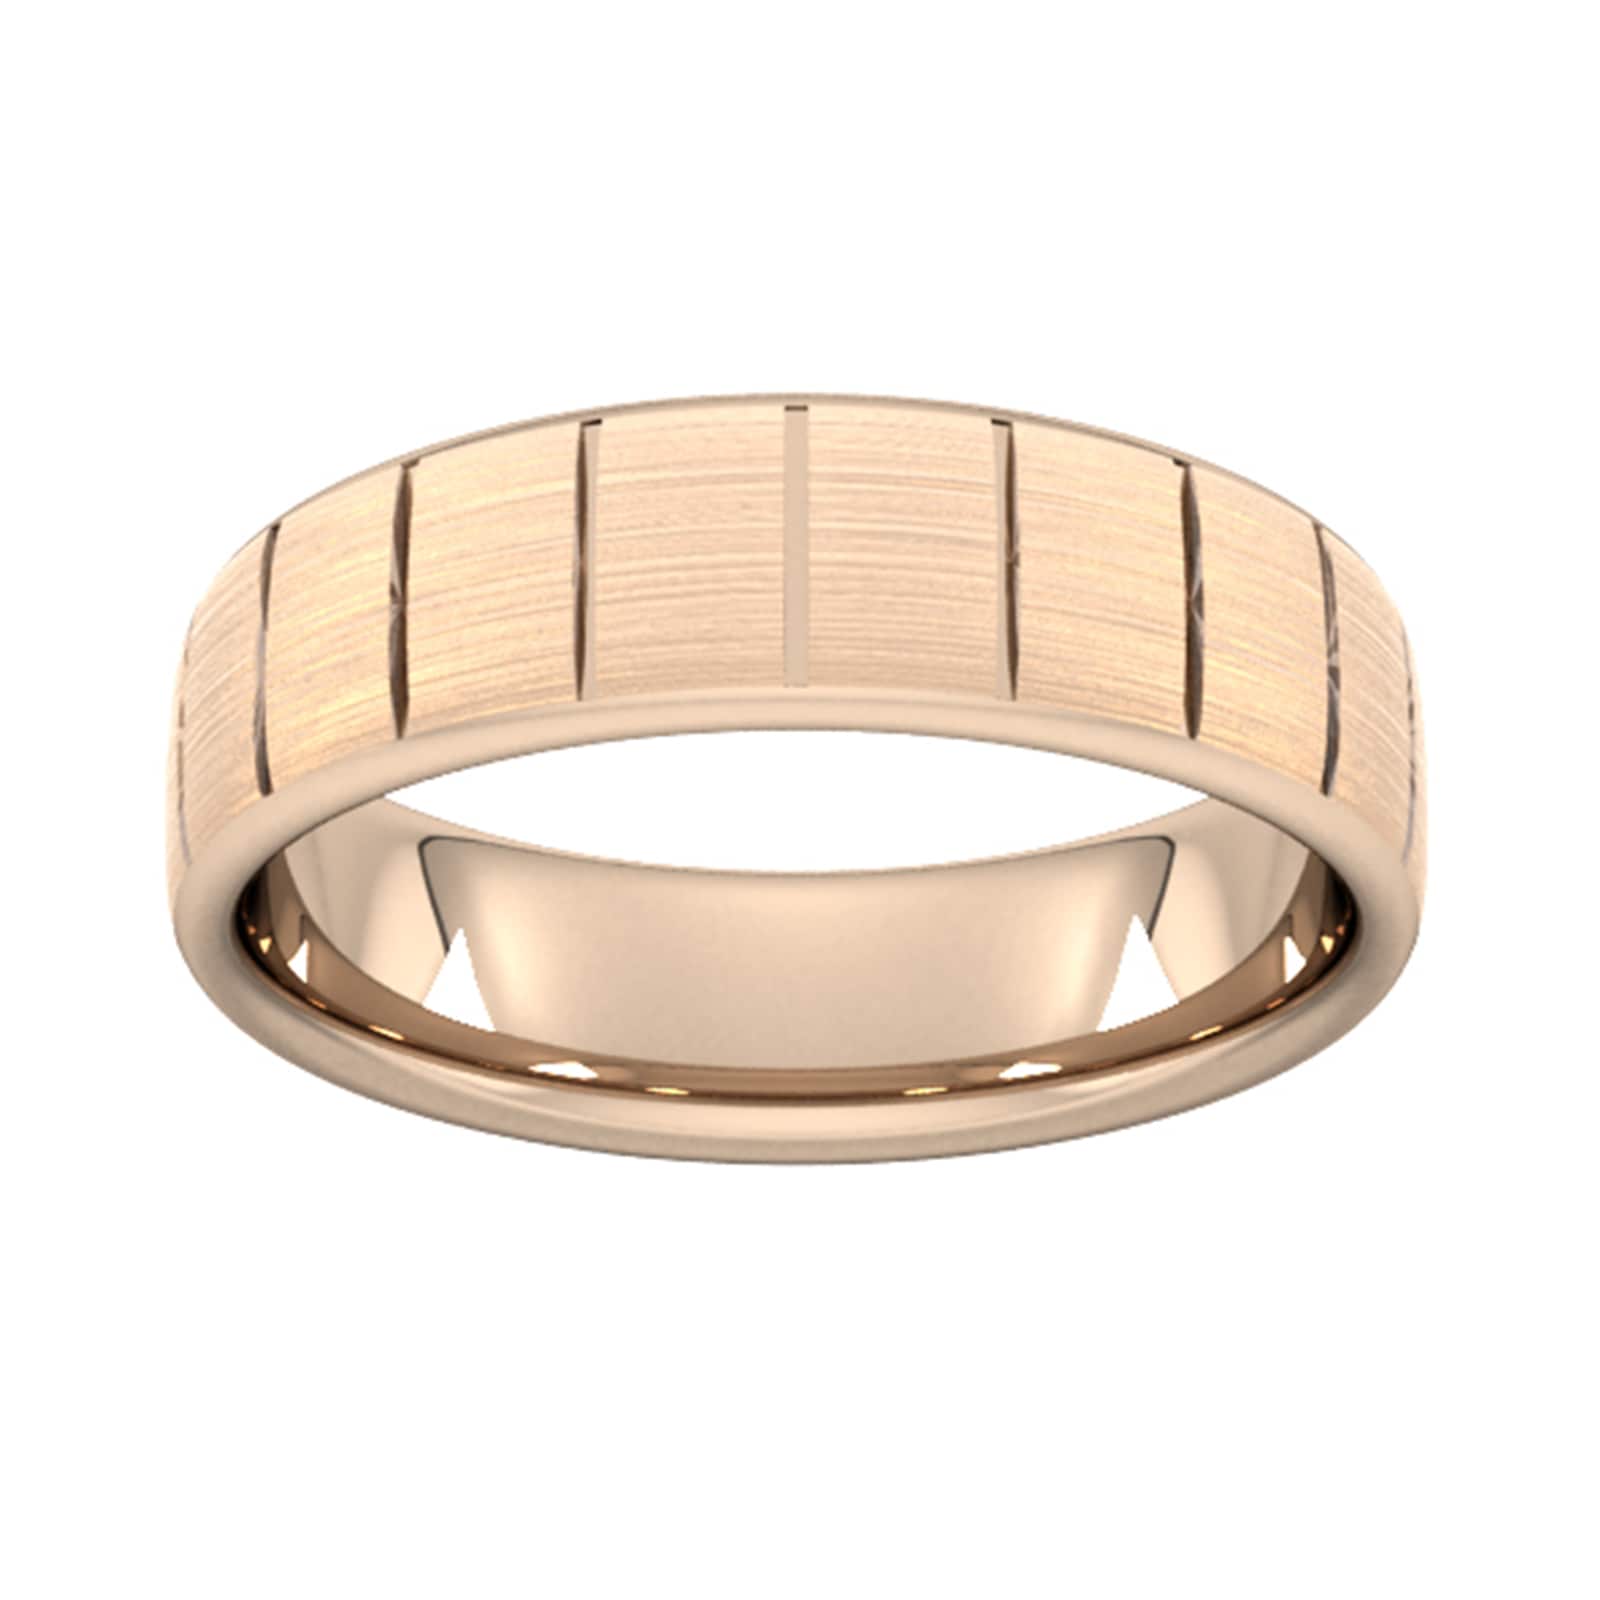 6mm Slight Court Extra Heavy Vertical Lines Wedding Ring In 18 Carat Rose Gold - Ring Size O